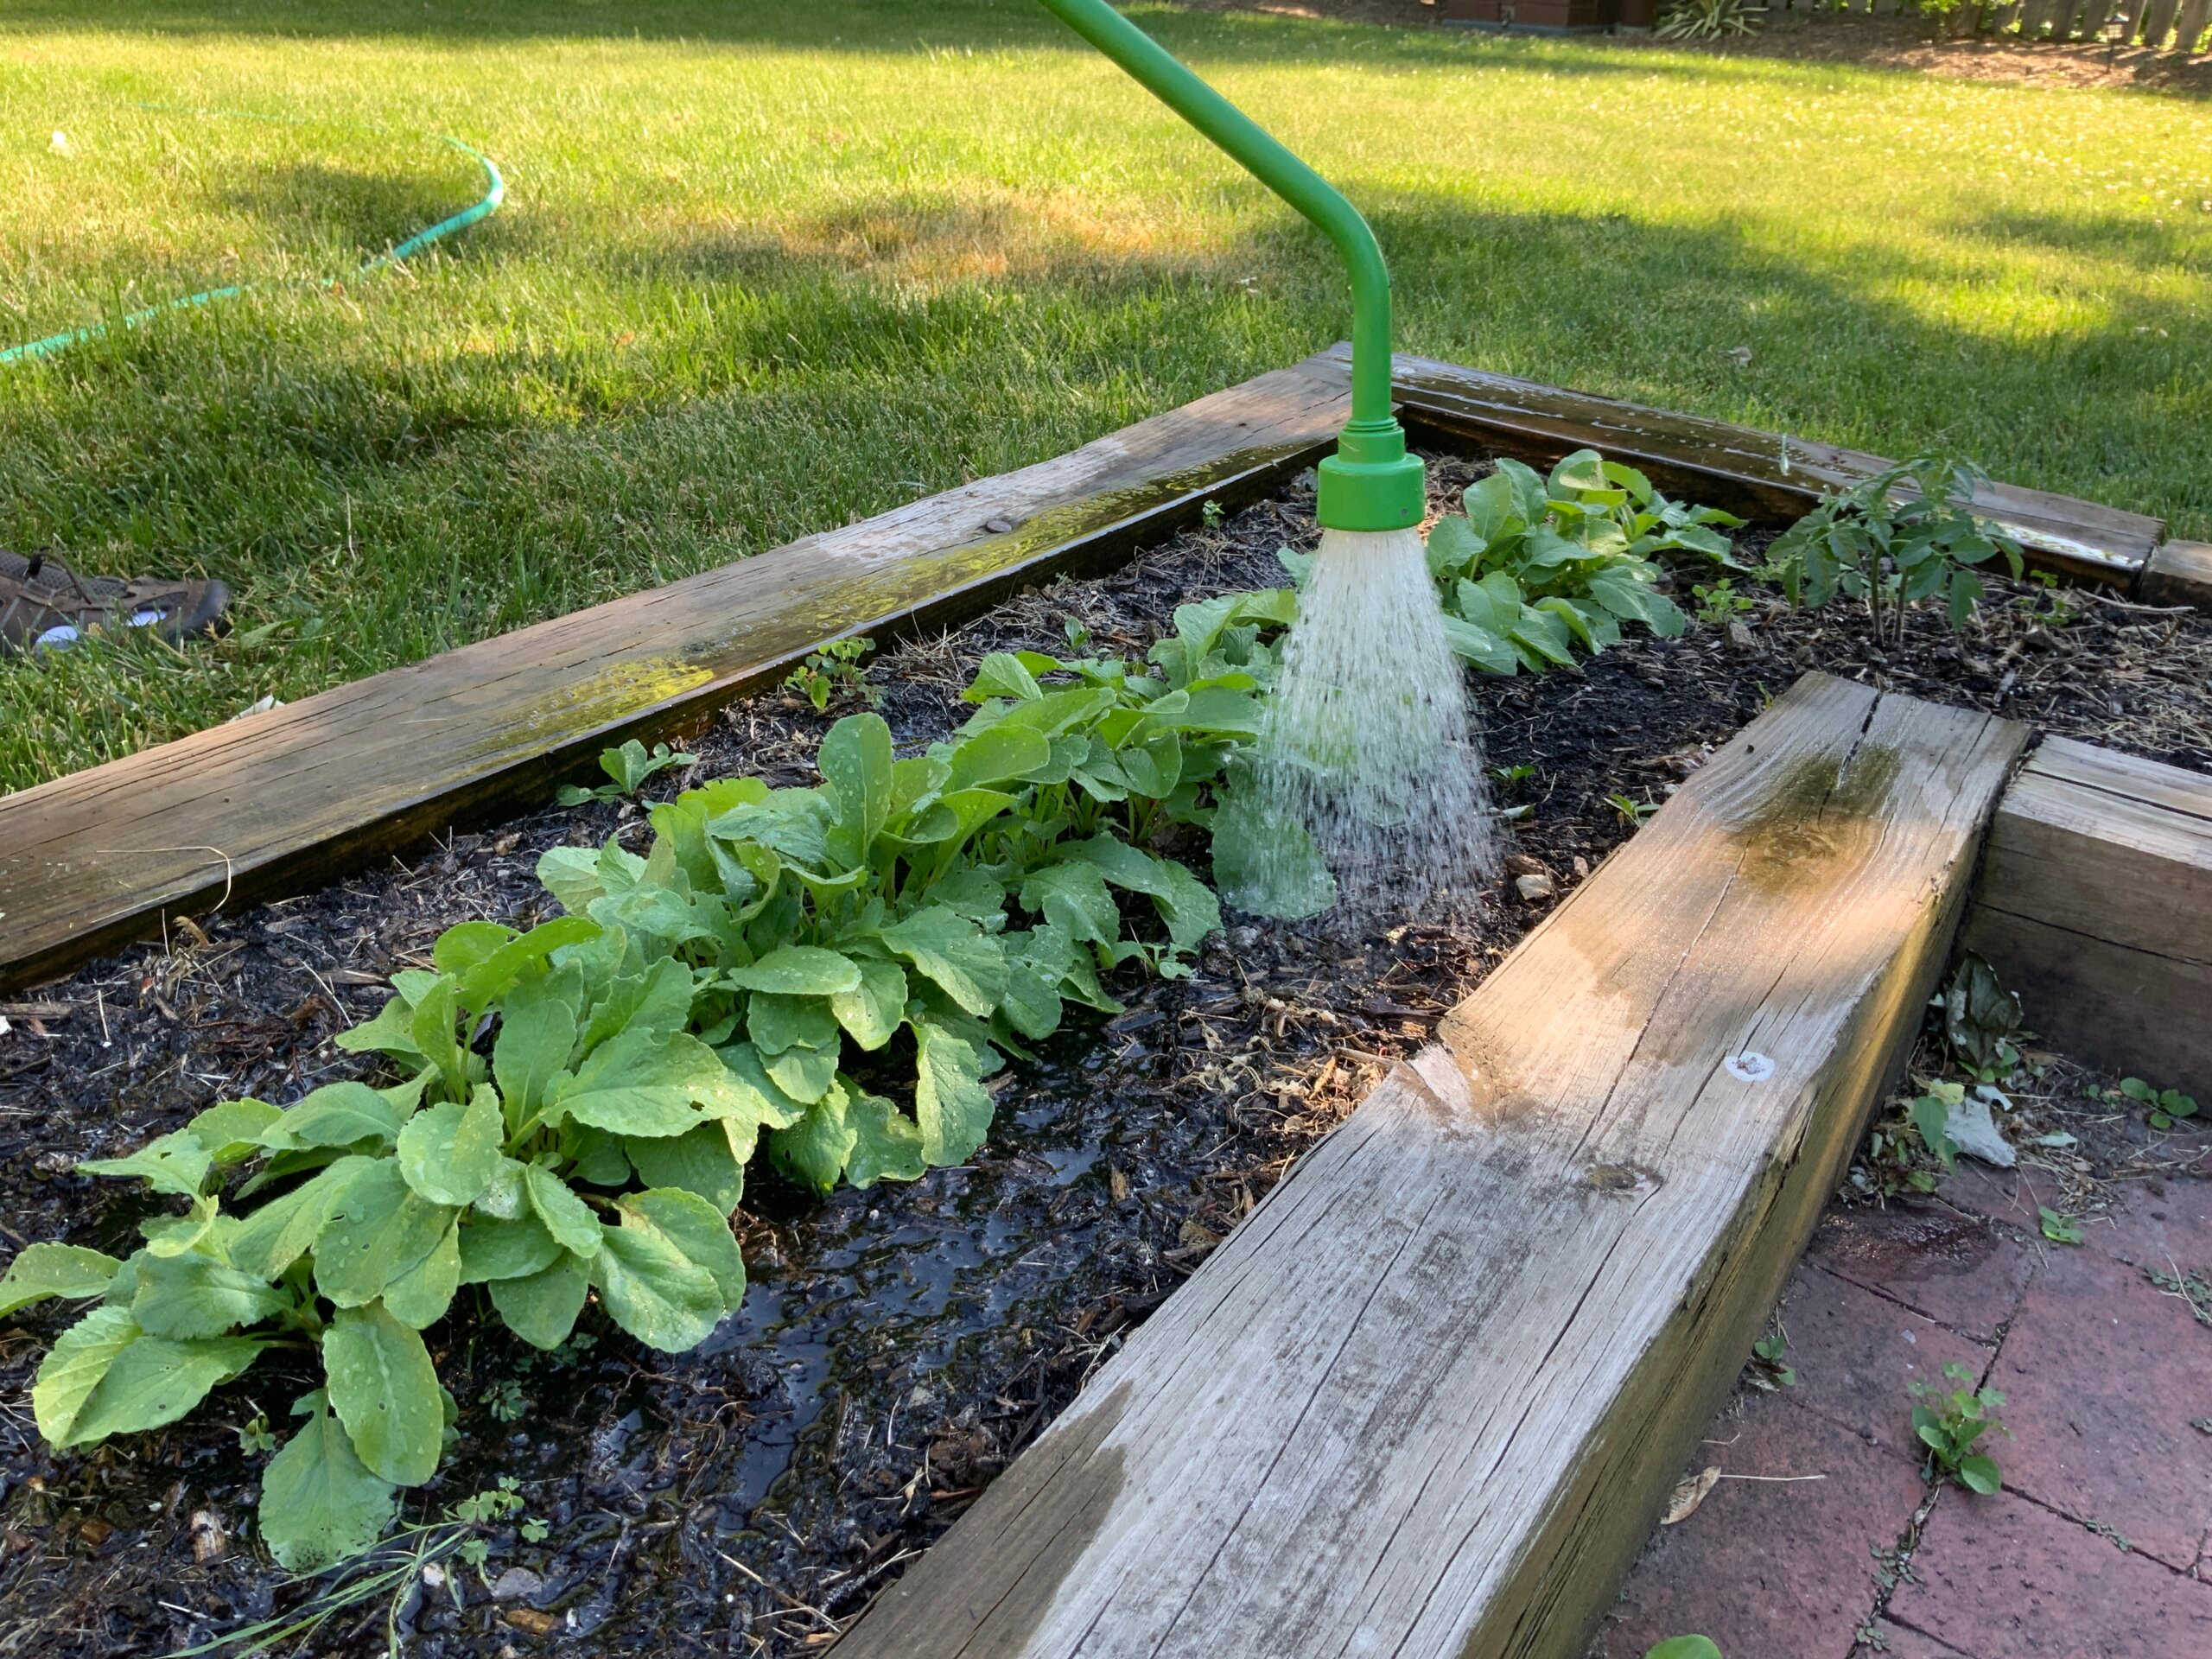 Image of plants in a planter being watered.